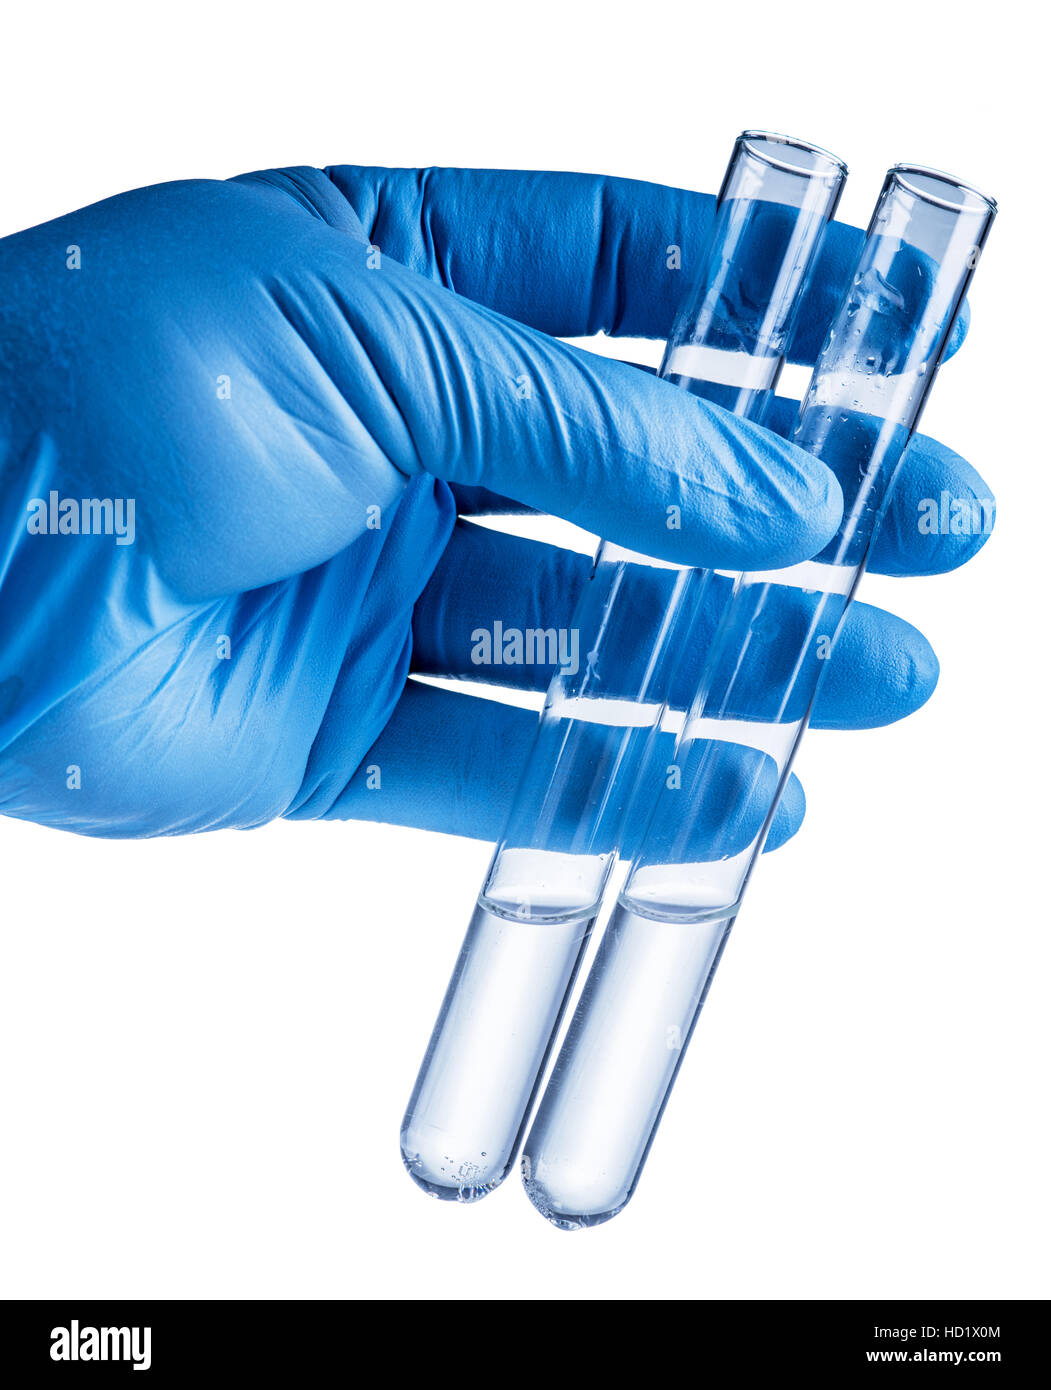 Laboratory beakers in analyst's hand in plastic glove. File contains clipping paths. Stock Photo